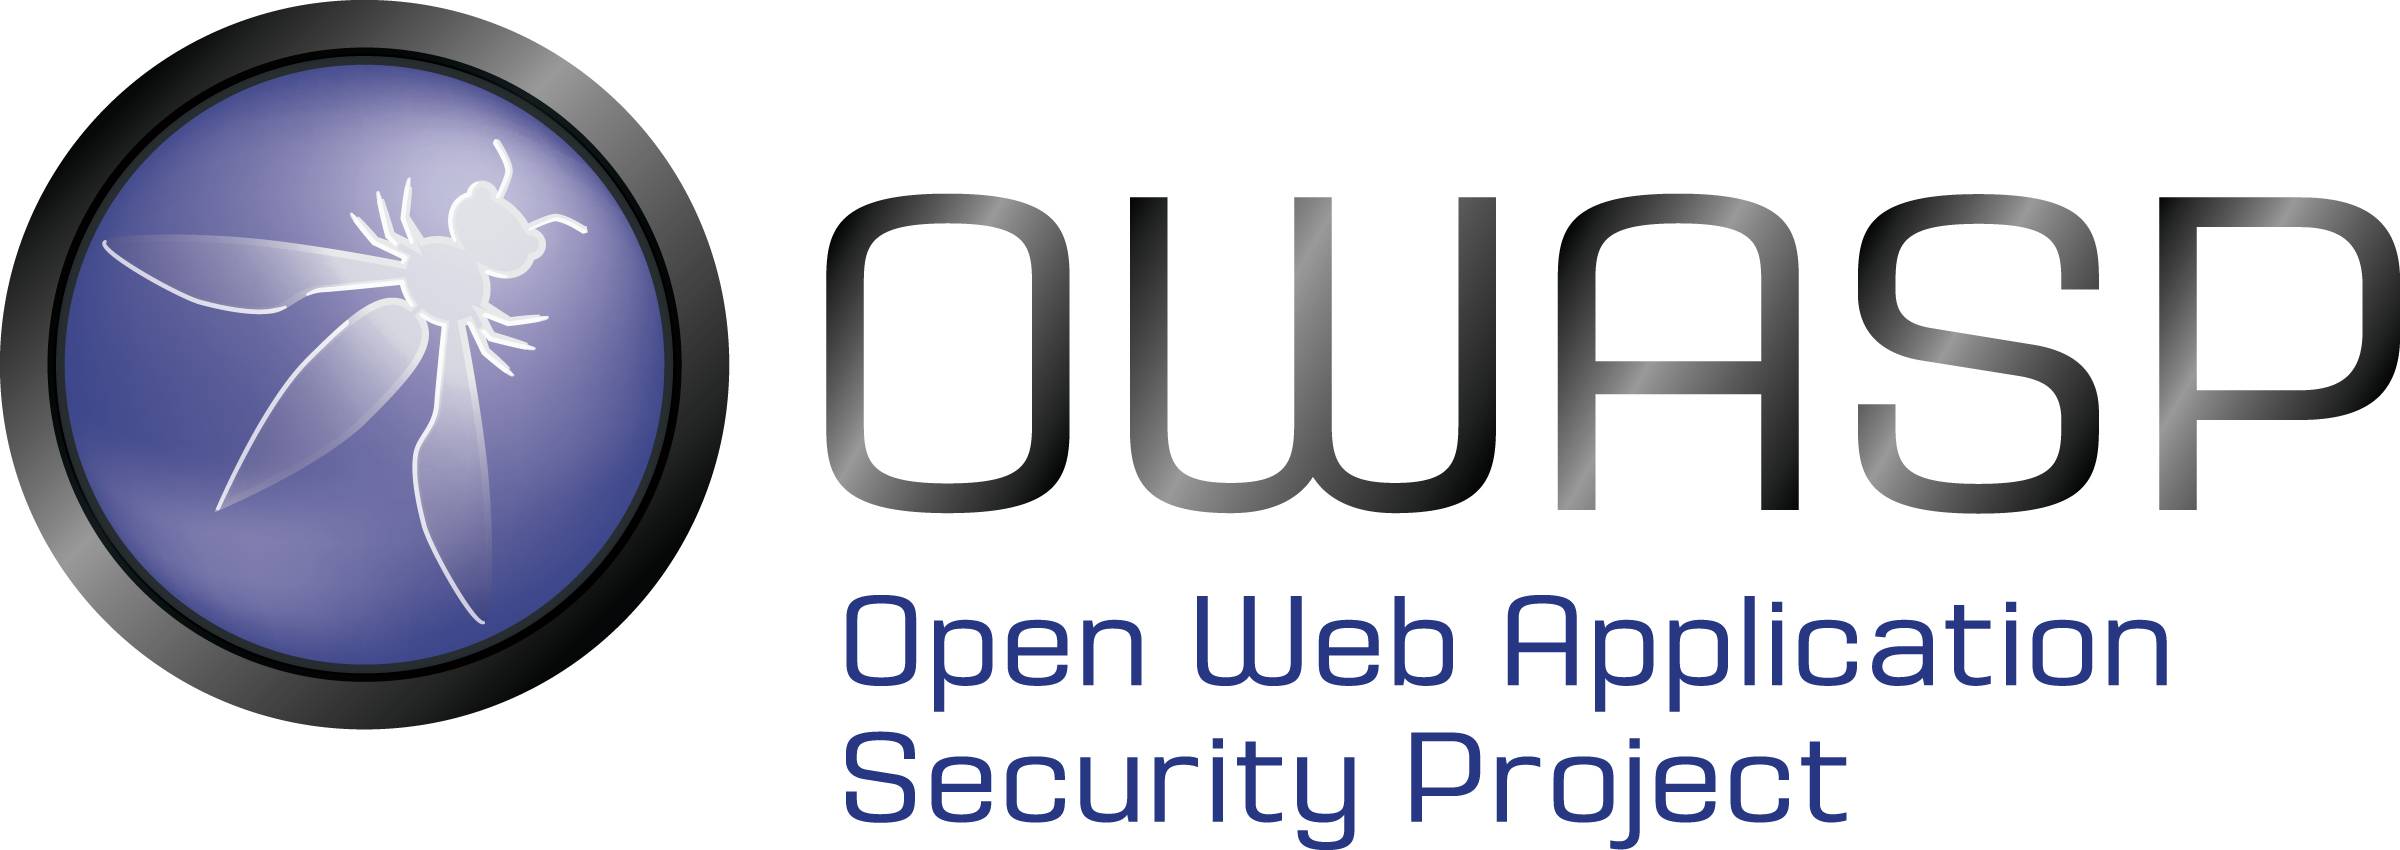 Open Web Application Security Project logo